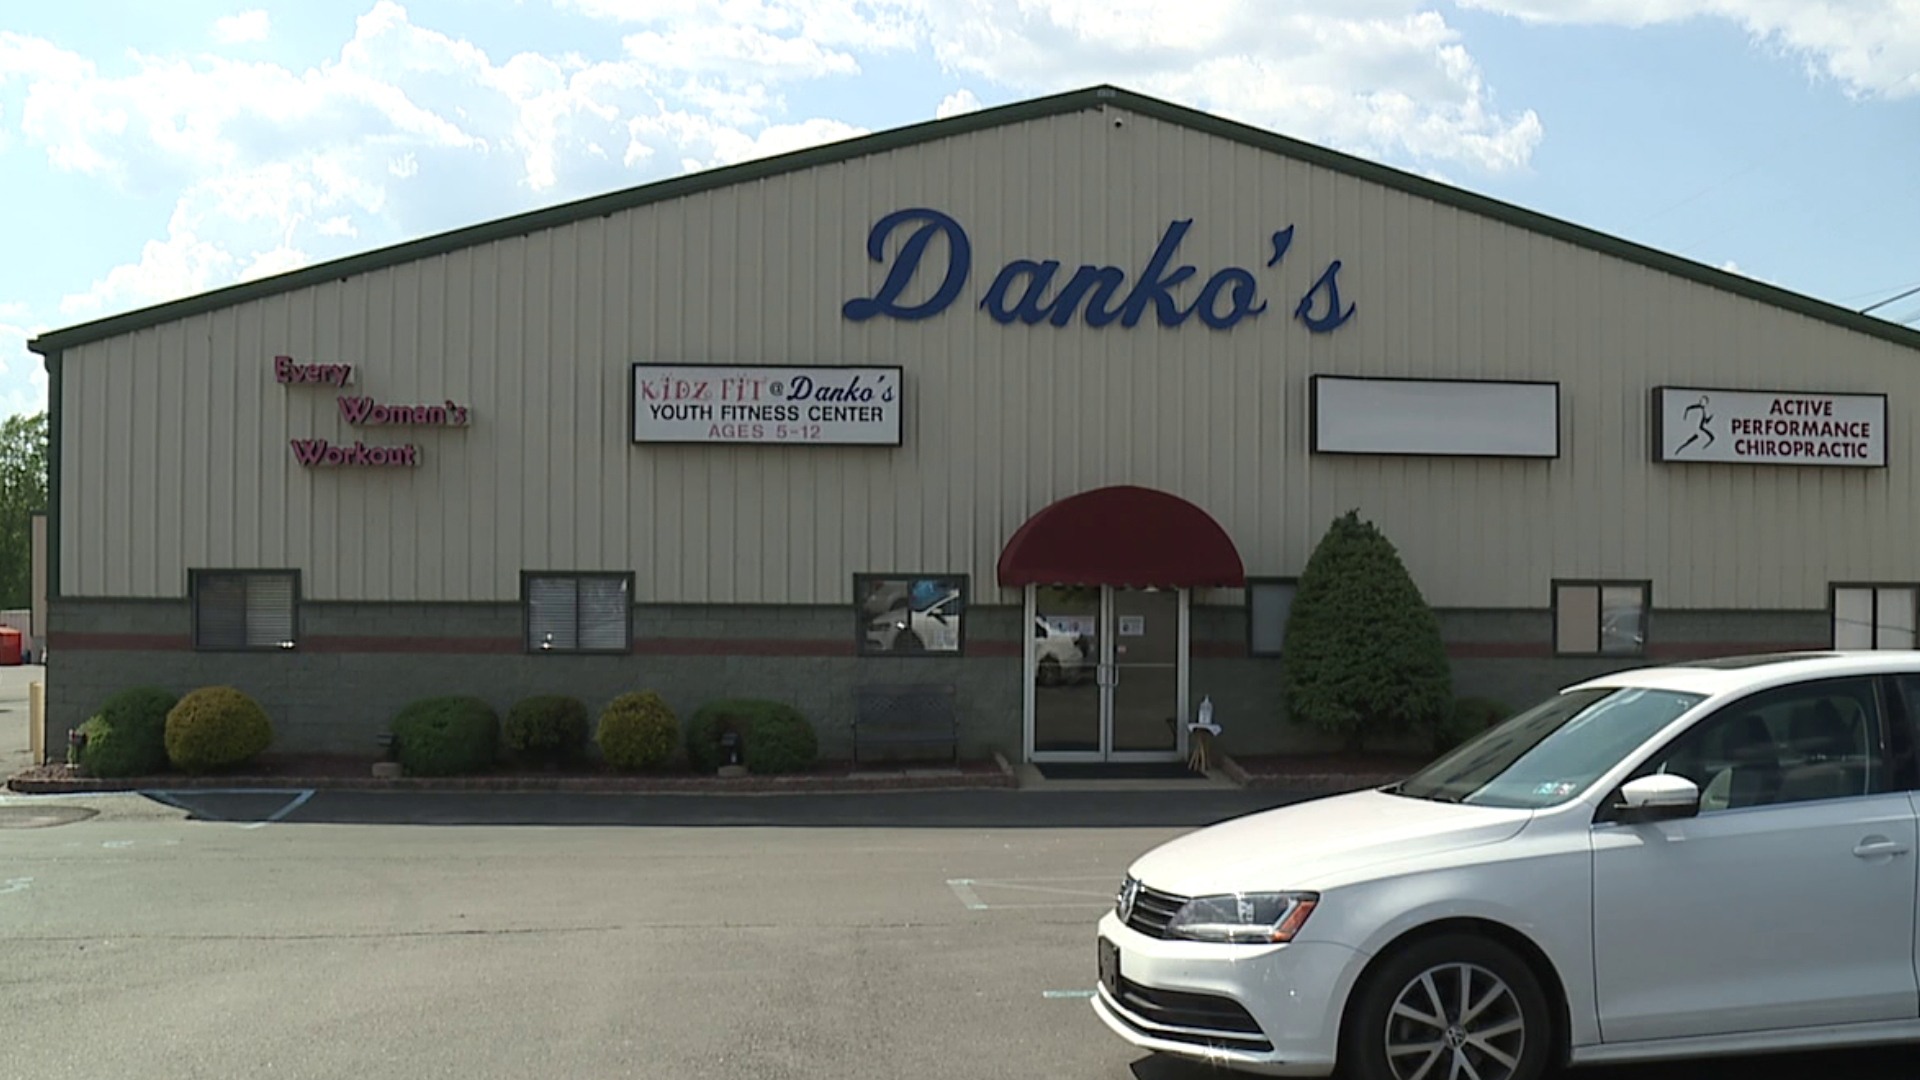 Danko's All American Fitness in Plains Township welcomed gym members back for the first time in more than two months Tuesday morning, defying the governor's plans.